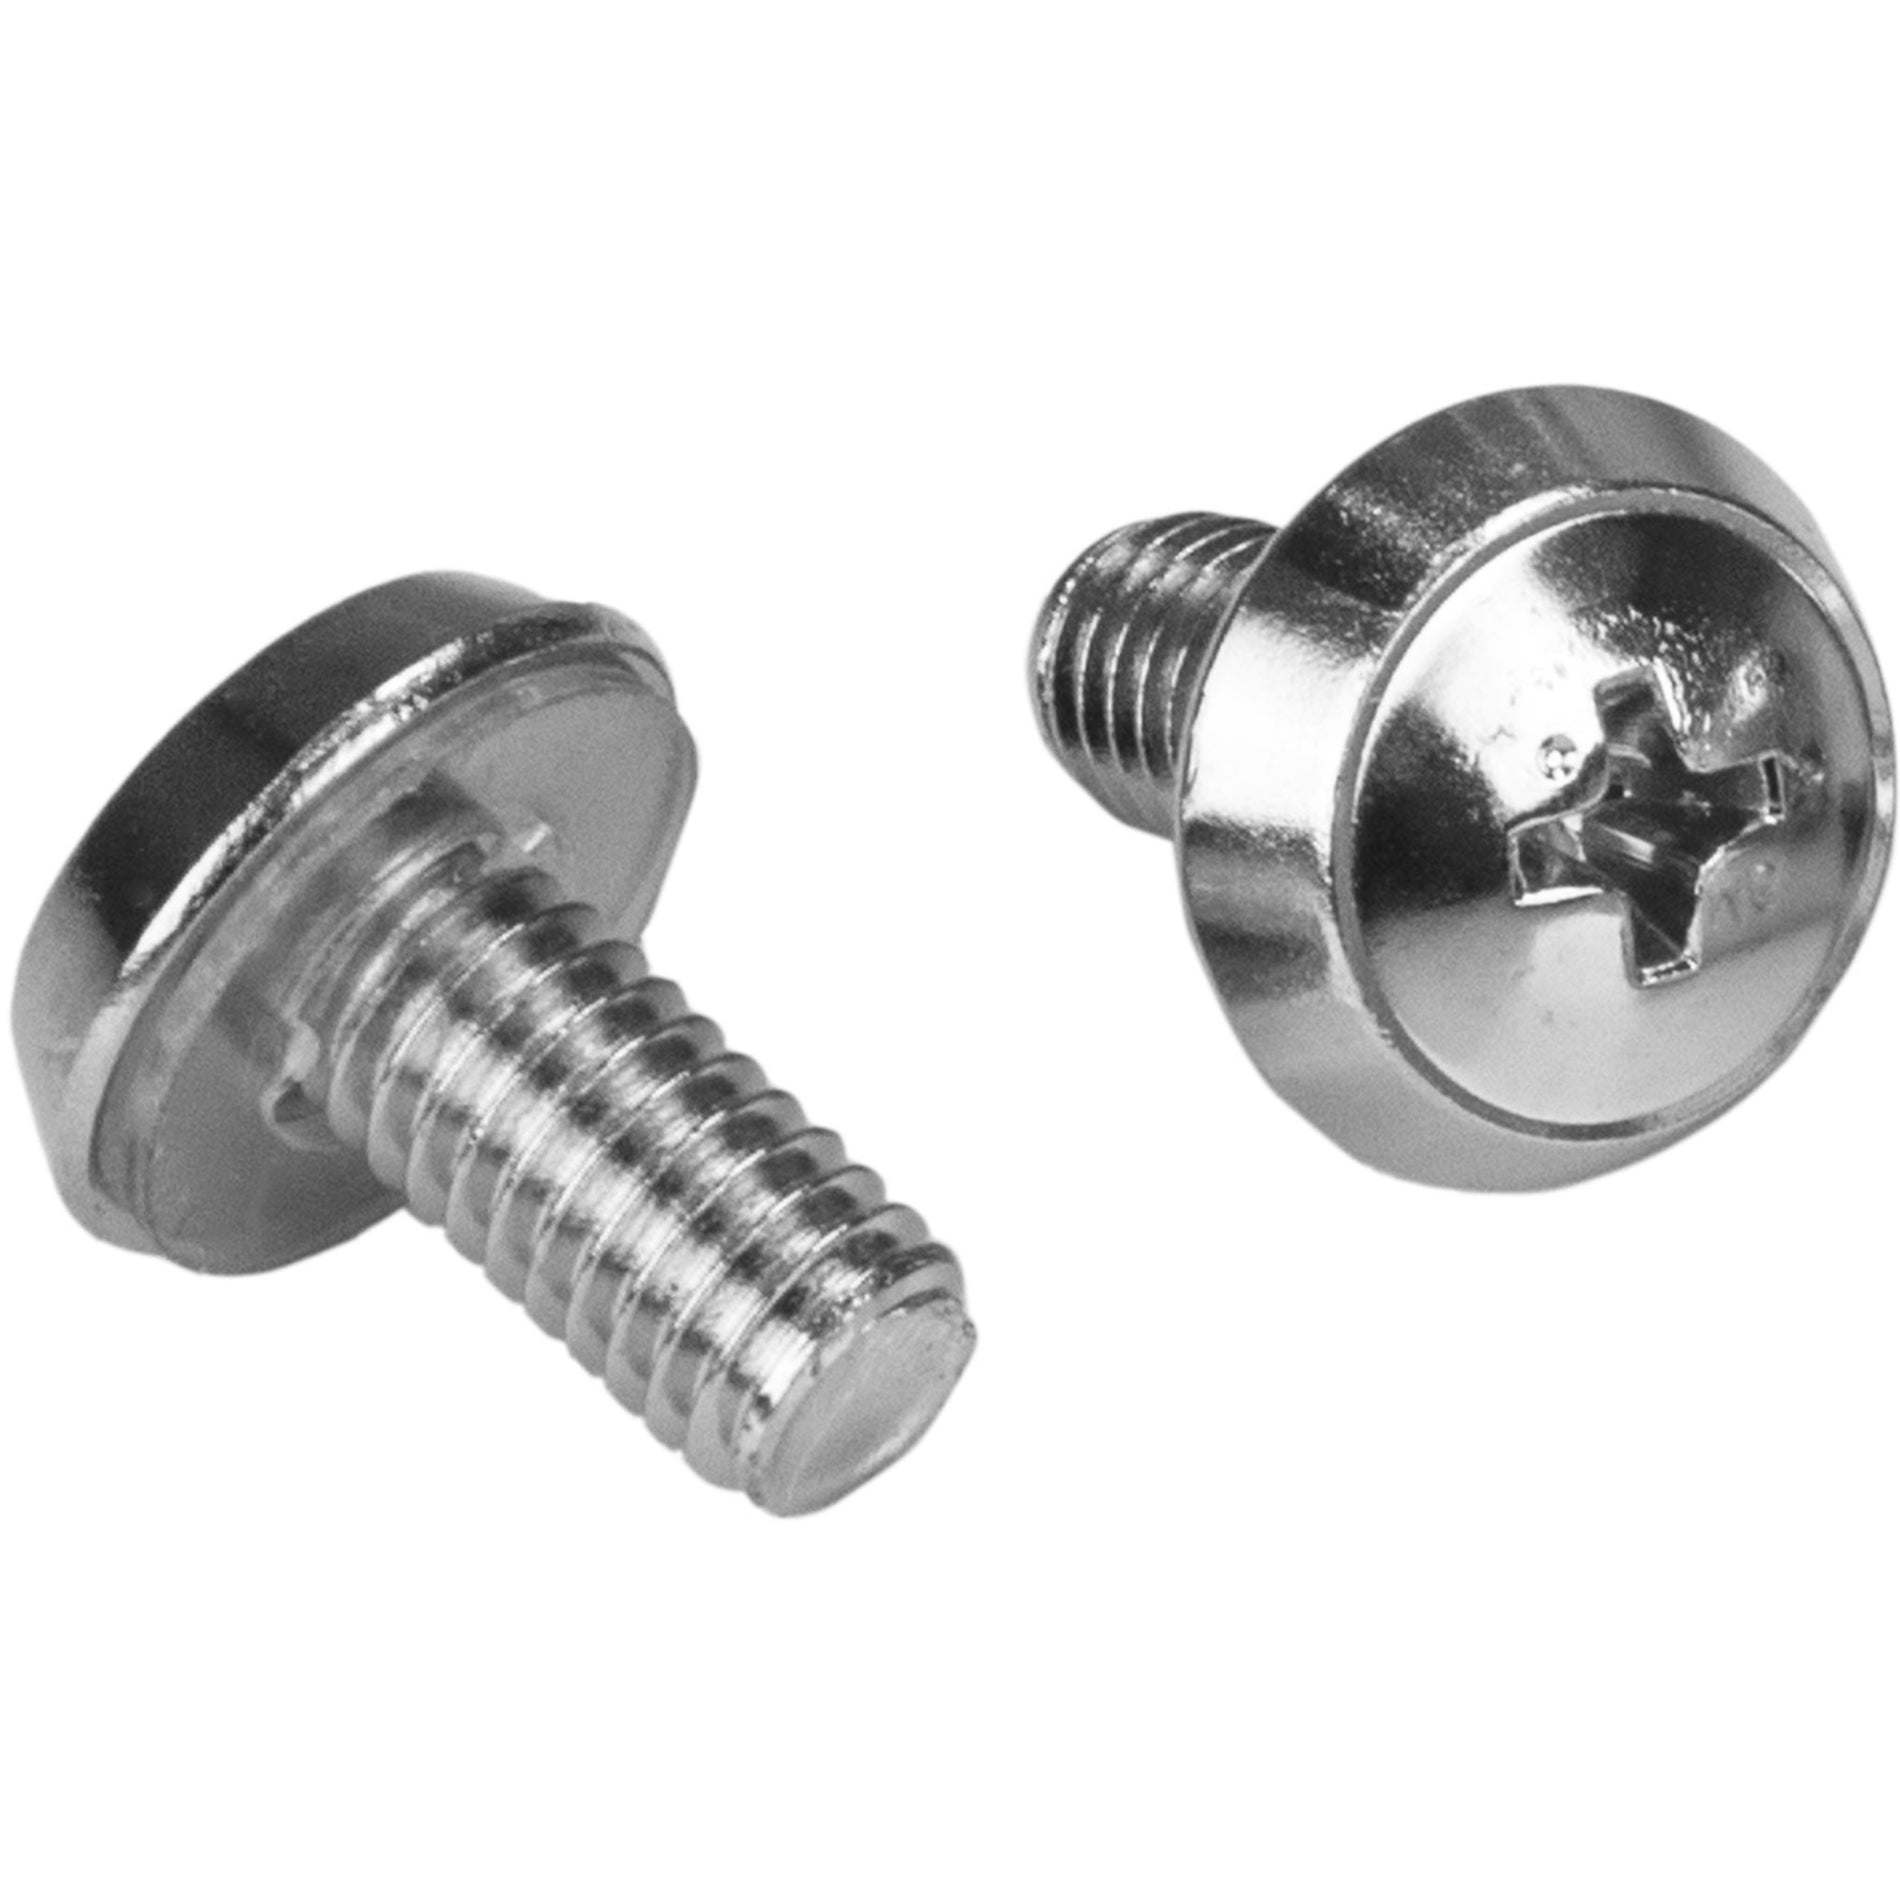 StarTech.com CABSCRWM620 M6 Rack Screws and M6 Cage Nuts - 20 Pack, Rust Resistant, Nickel Plated, Installation Tool Included